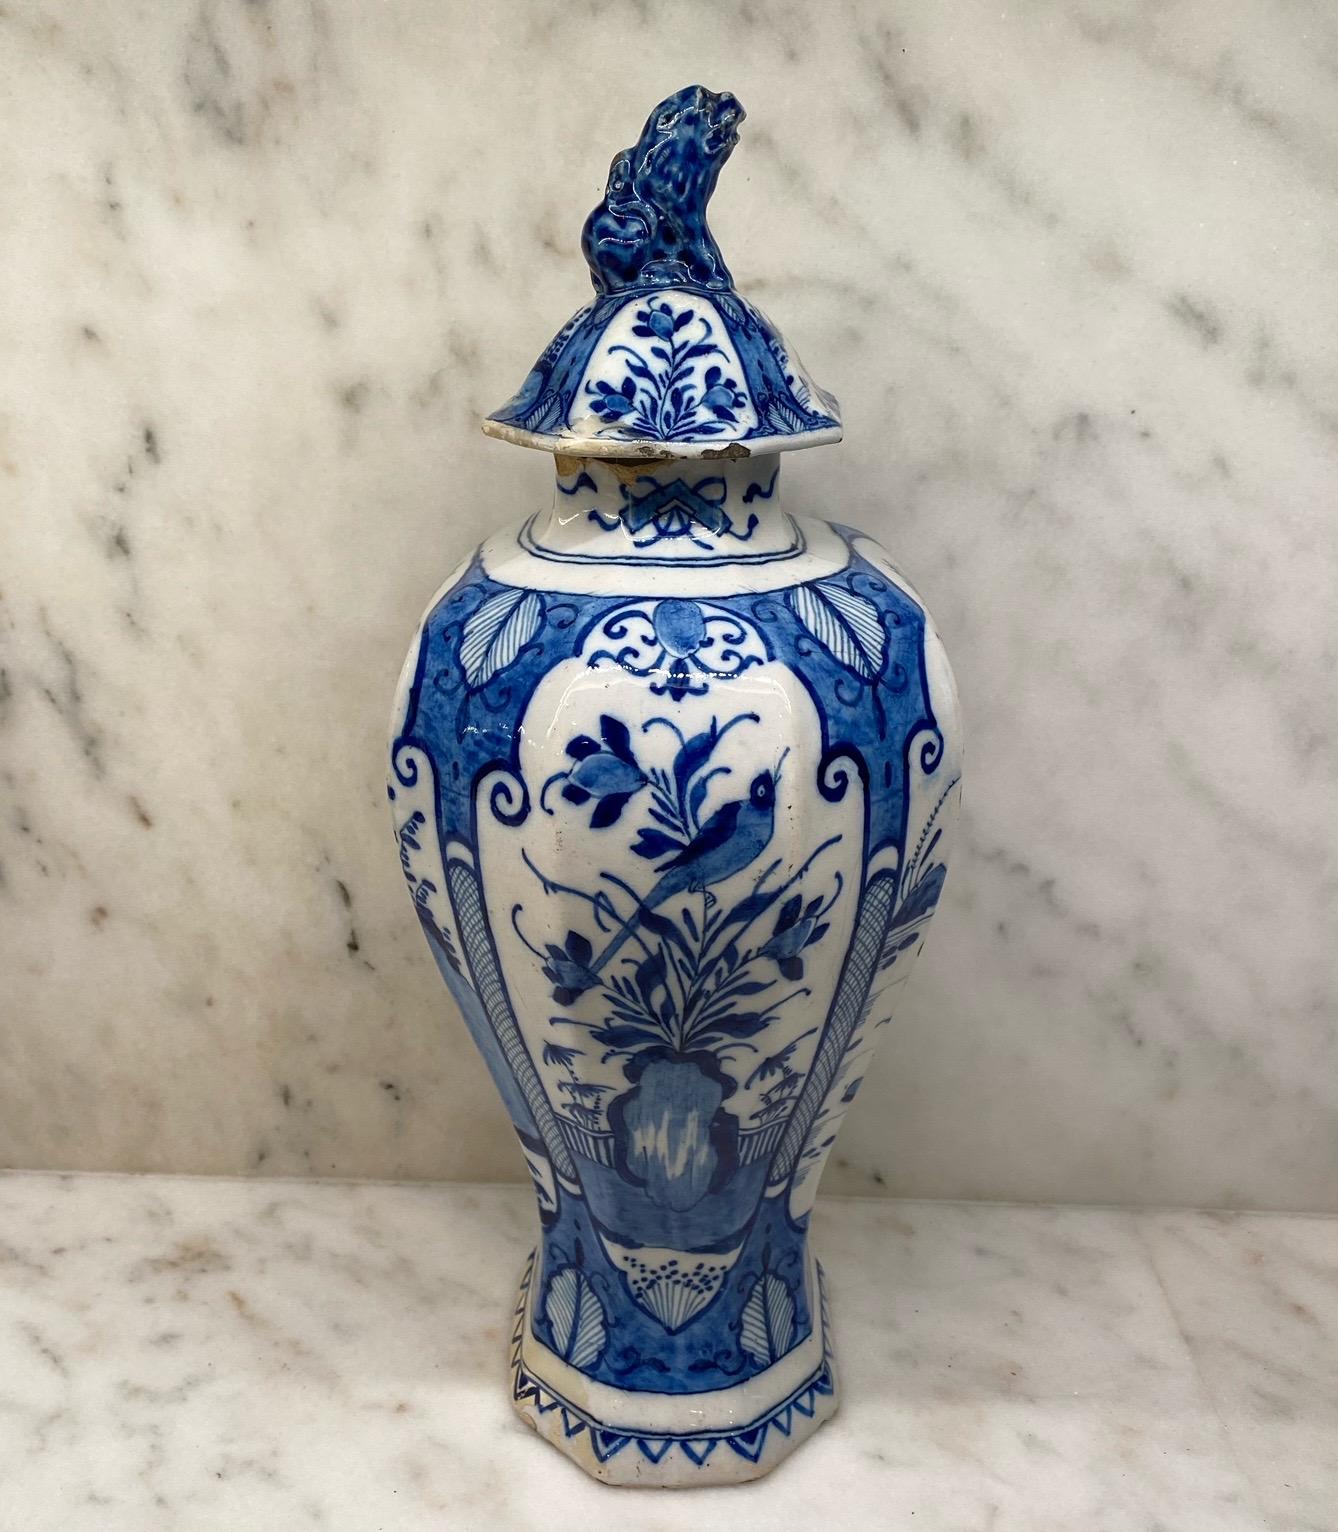 Dutch blue & white delft vase with a top, depicting scenes of birds on all sides, with floral motif. Great for the ornithologist - really lovely! Bought in the south of France. Without top 11.5 h
#5781.